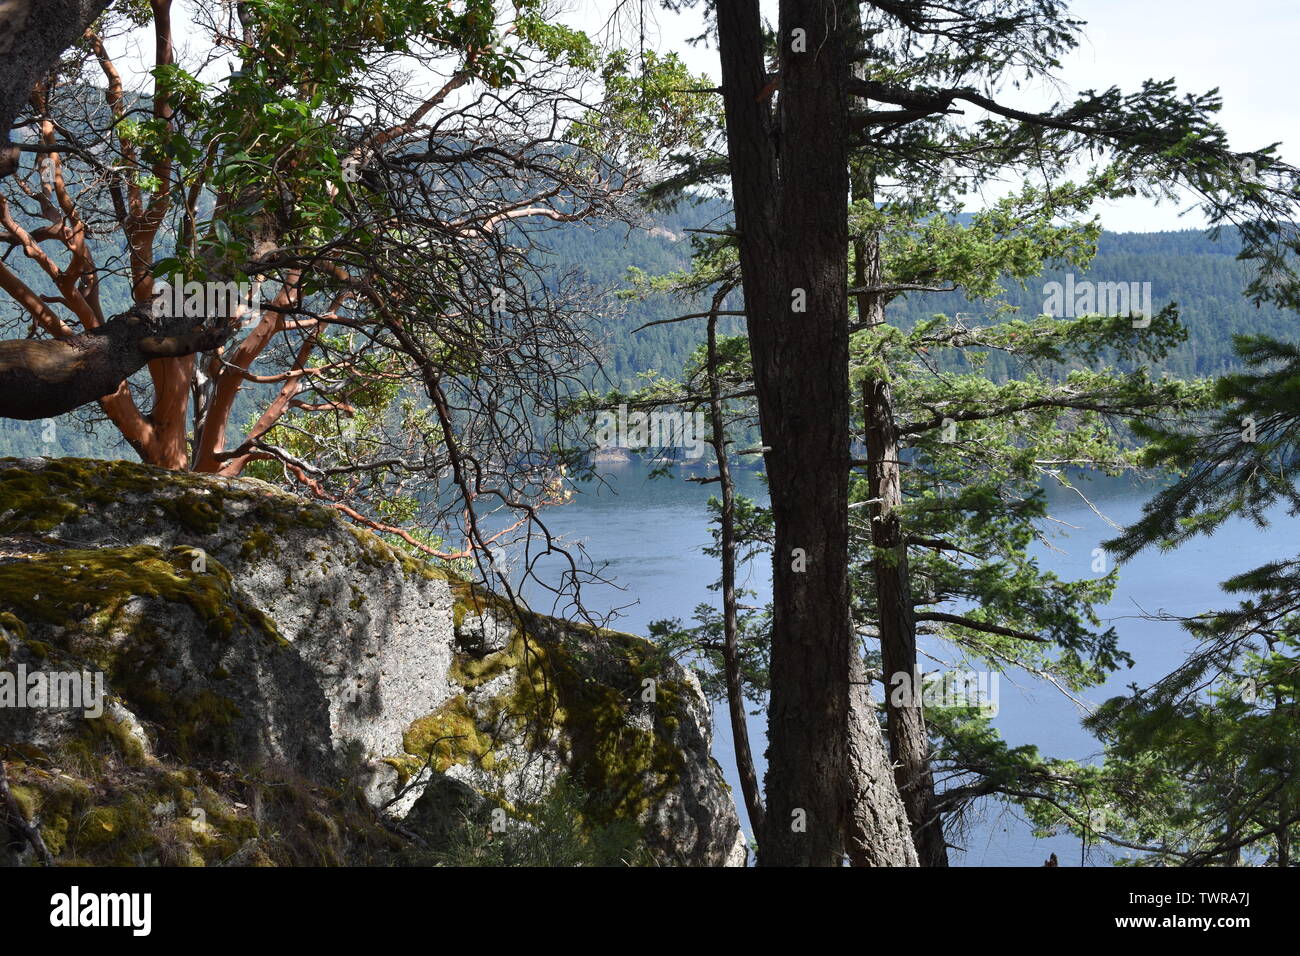 A barkless arbutus tree in Stoney Hill Park, overlooking Cowichan Bay, BC, Canada Stock Photo